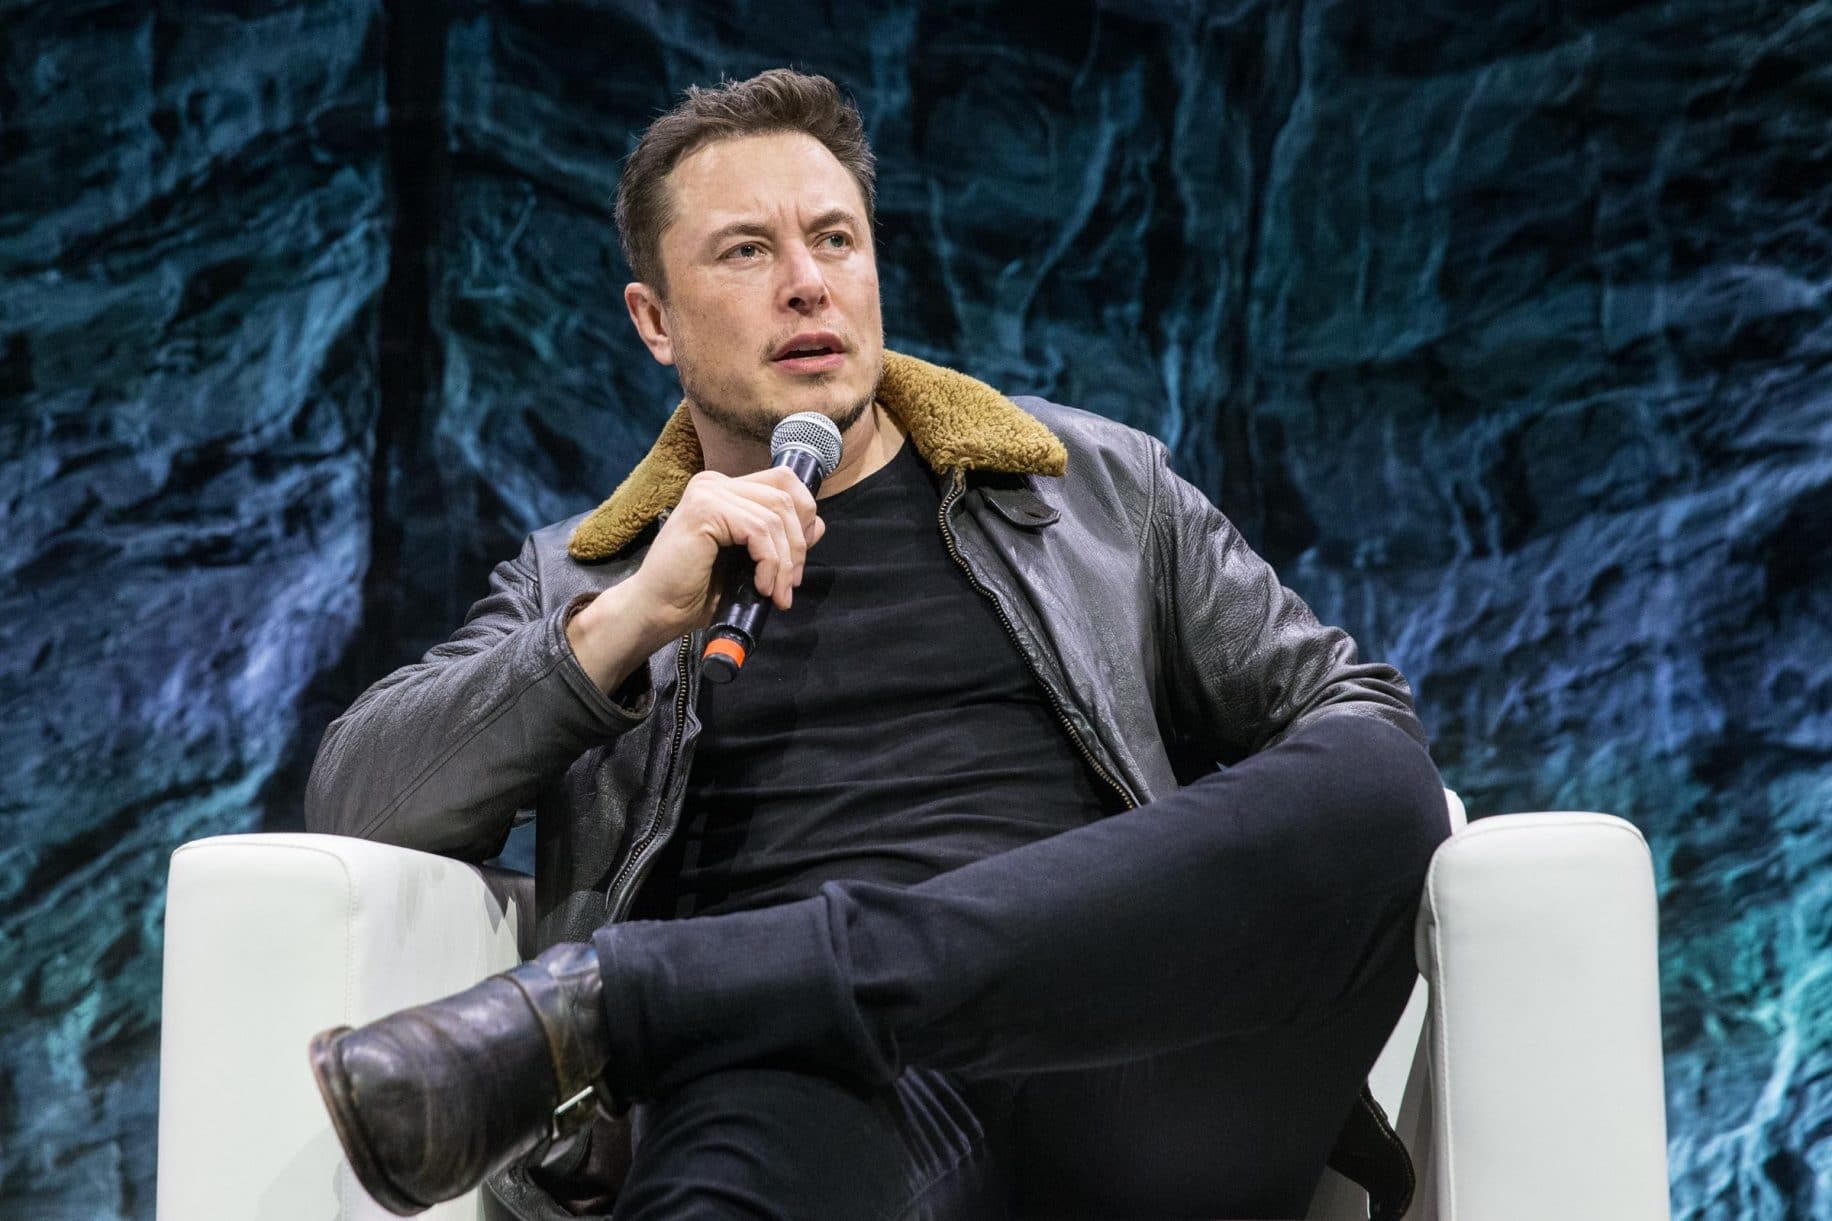 Elon Musk reacts to new Jan. 6 videos: ‘deeply wrong, legally and morally misleading people’